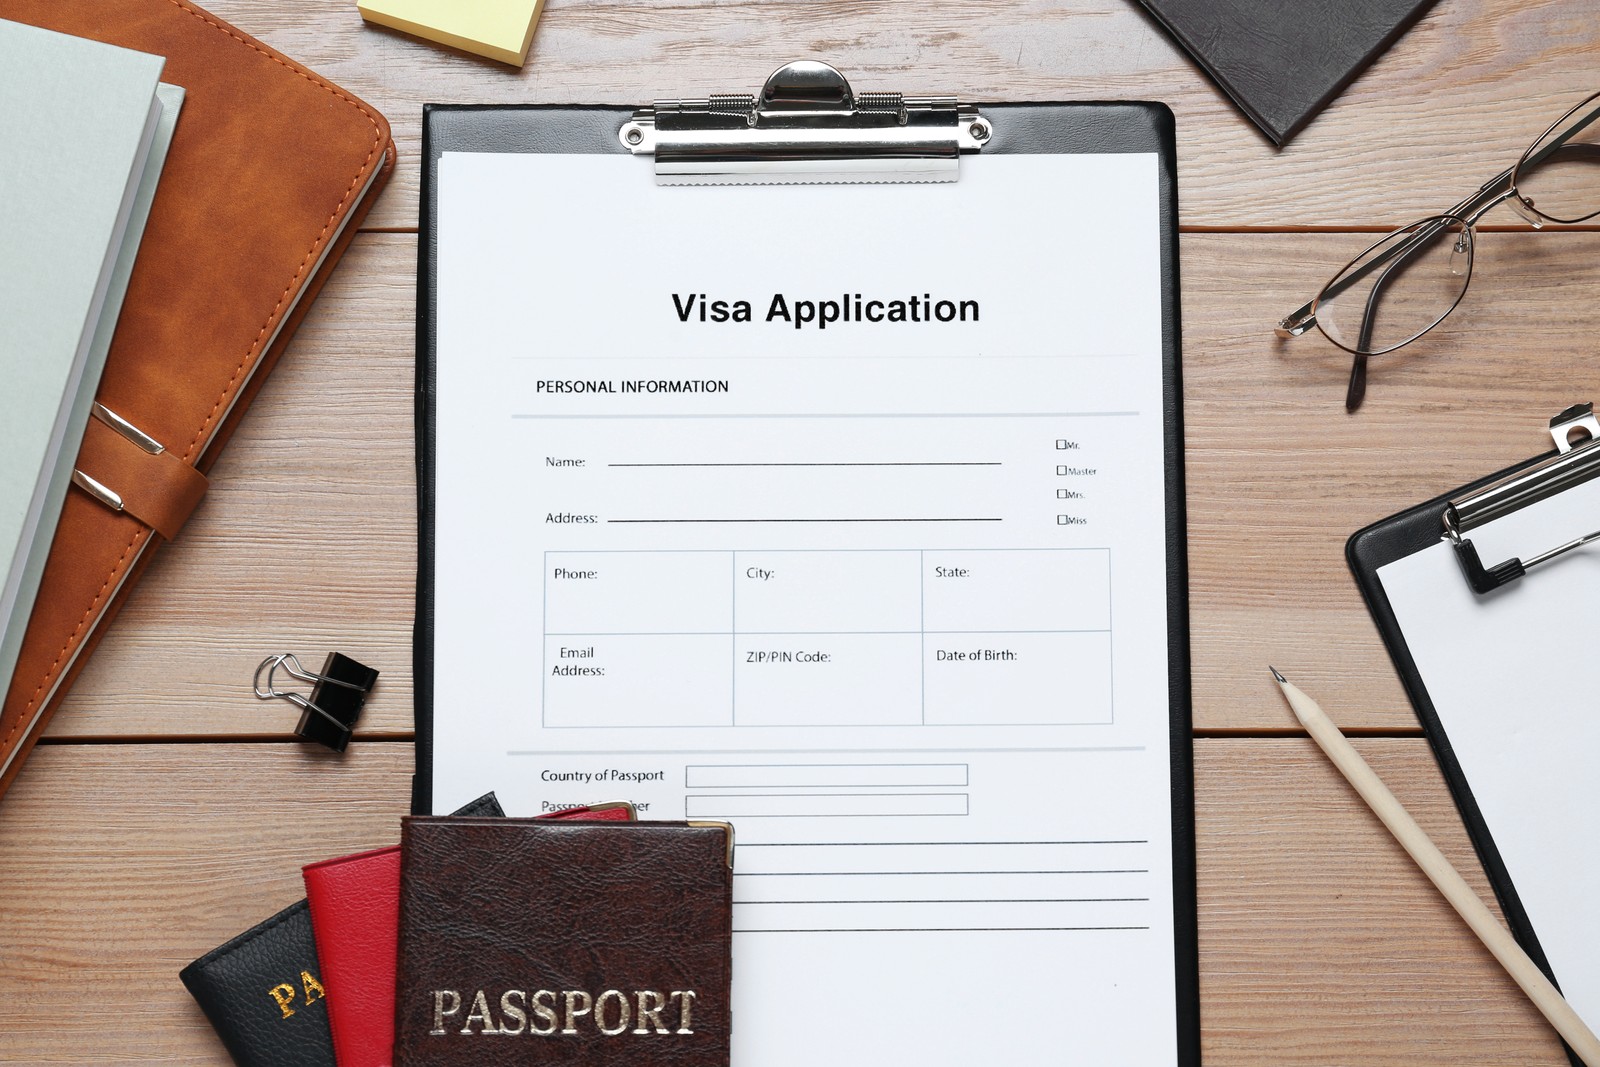 Photo of visa application form for immigration, passports and stationery on wooden table, flat lay